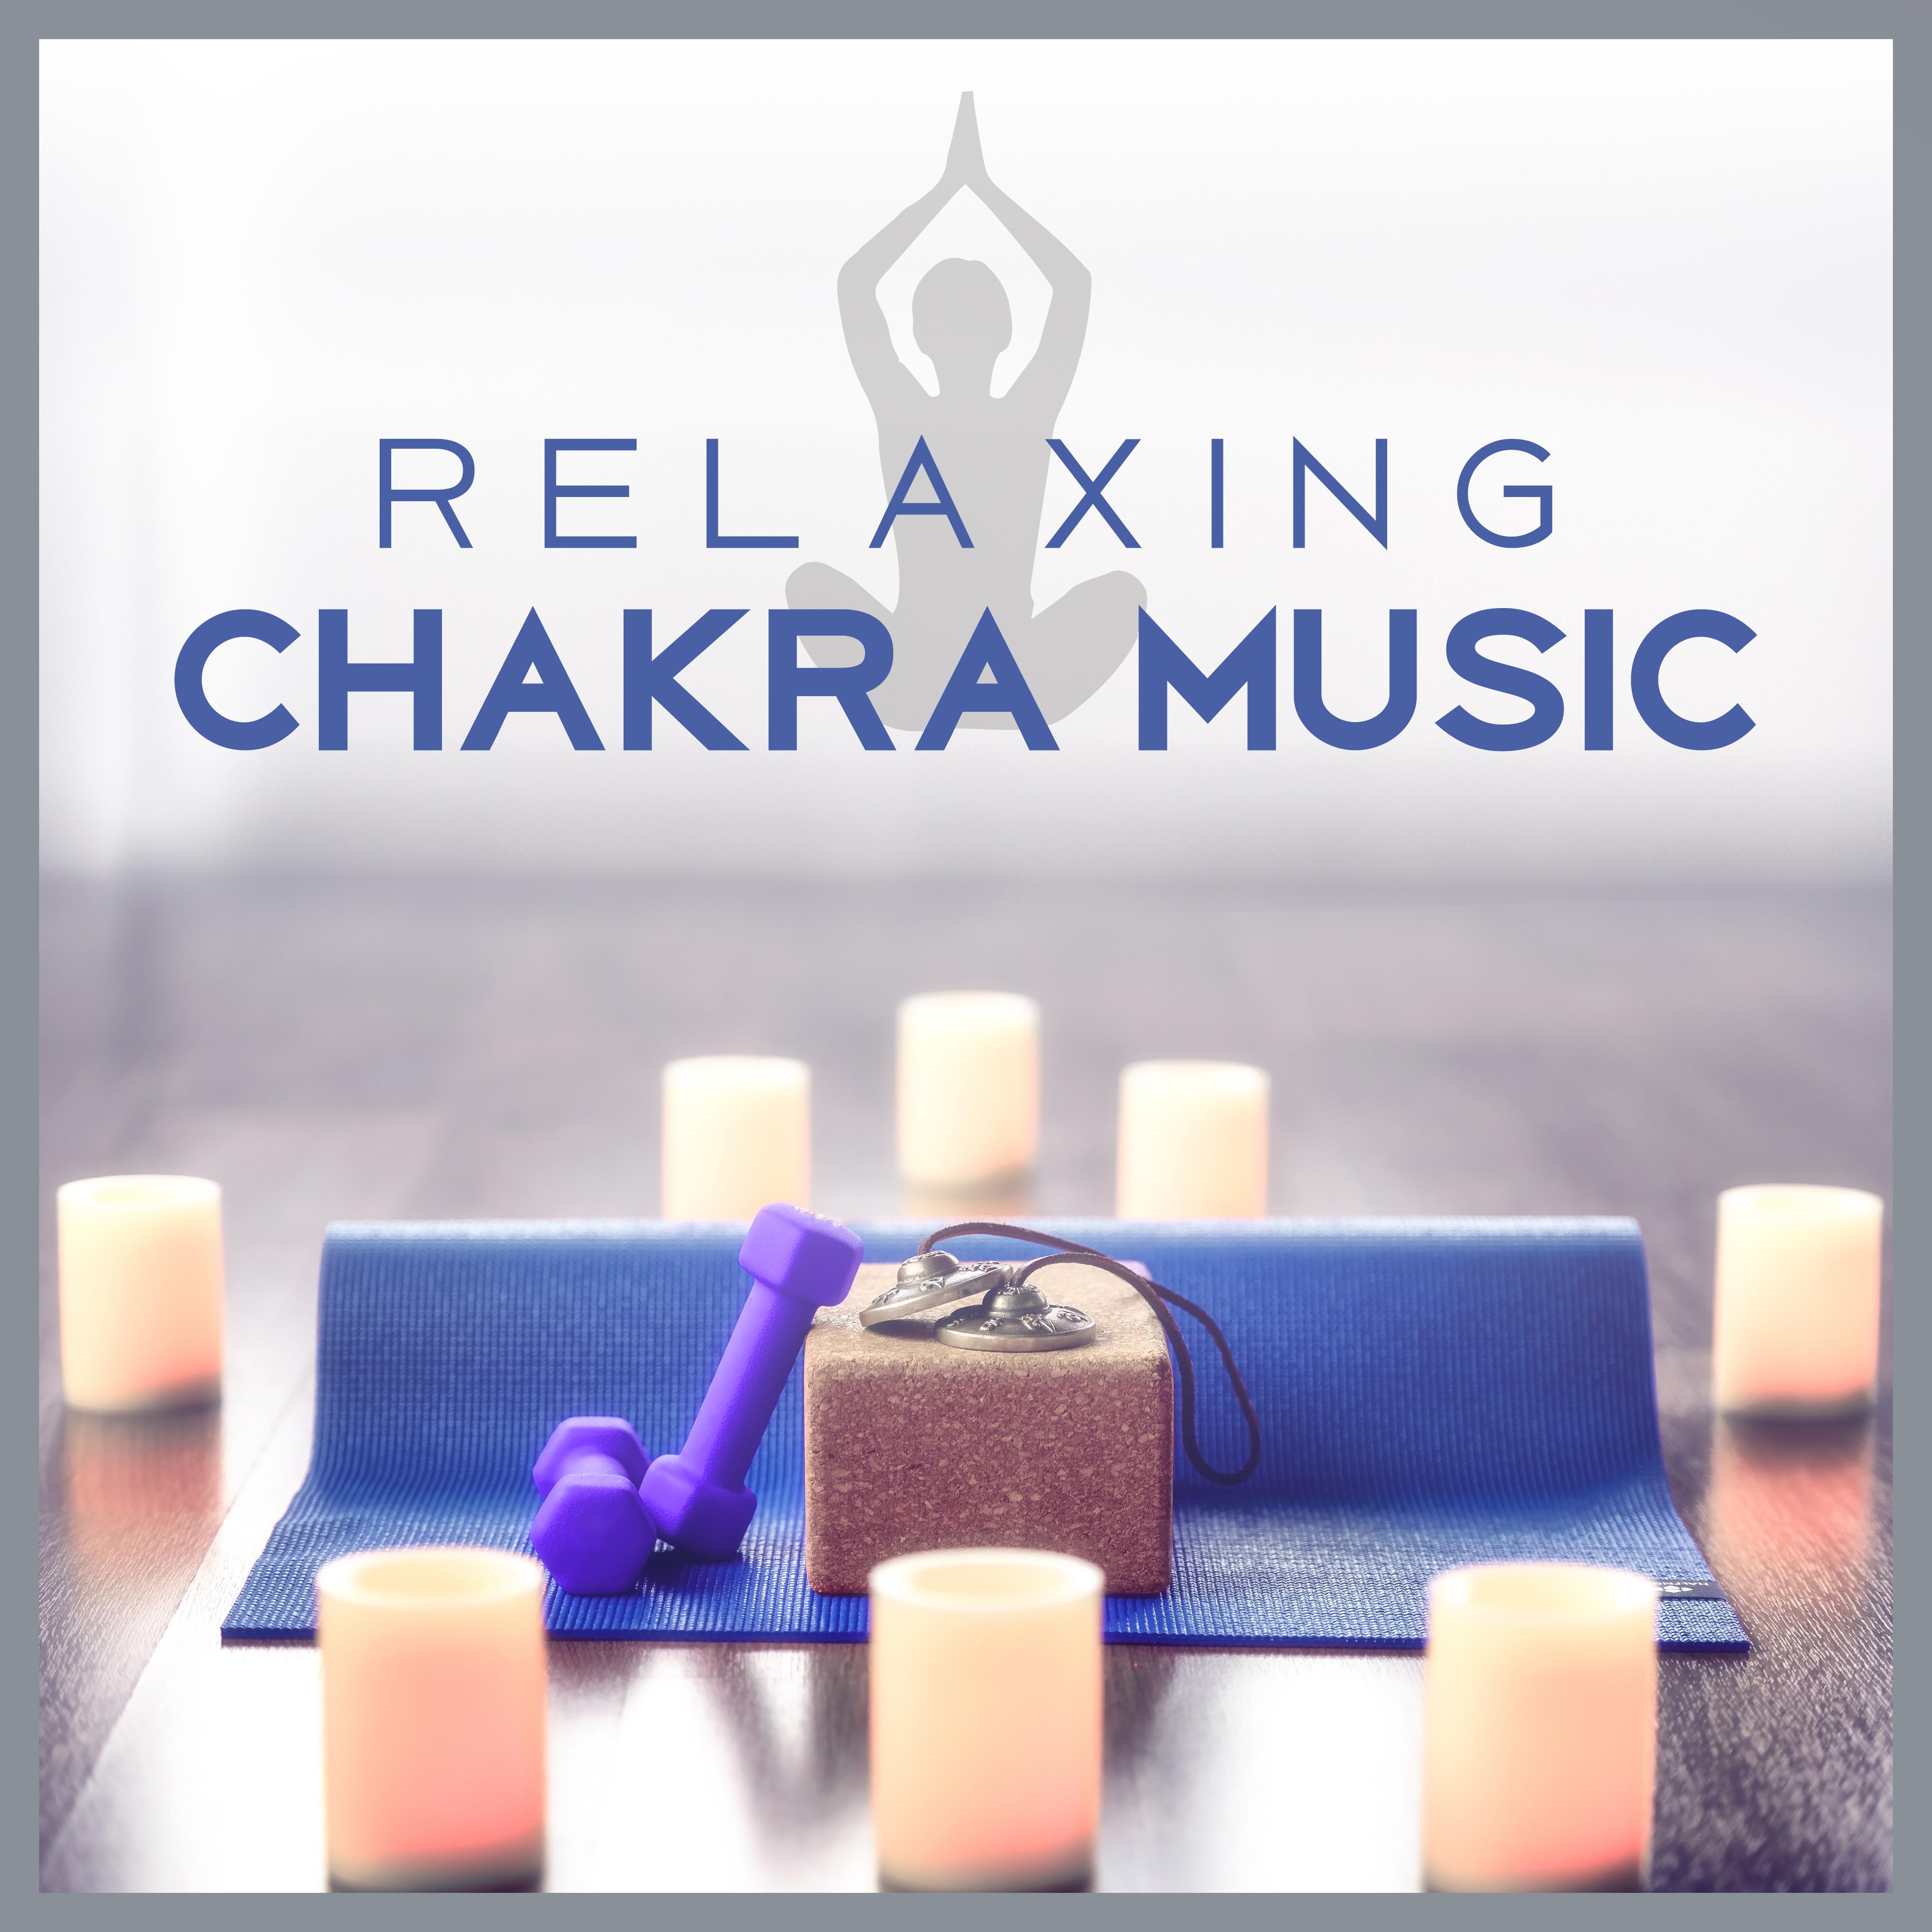 Relaxing Chakra Music – Soothing Waves, Harmony Sounds, Yoga Training, Meditation Calmness, Peaceful Mind